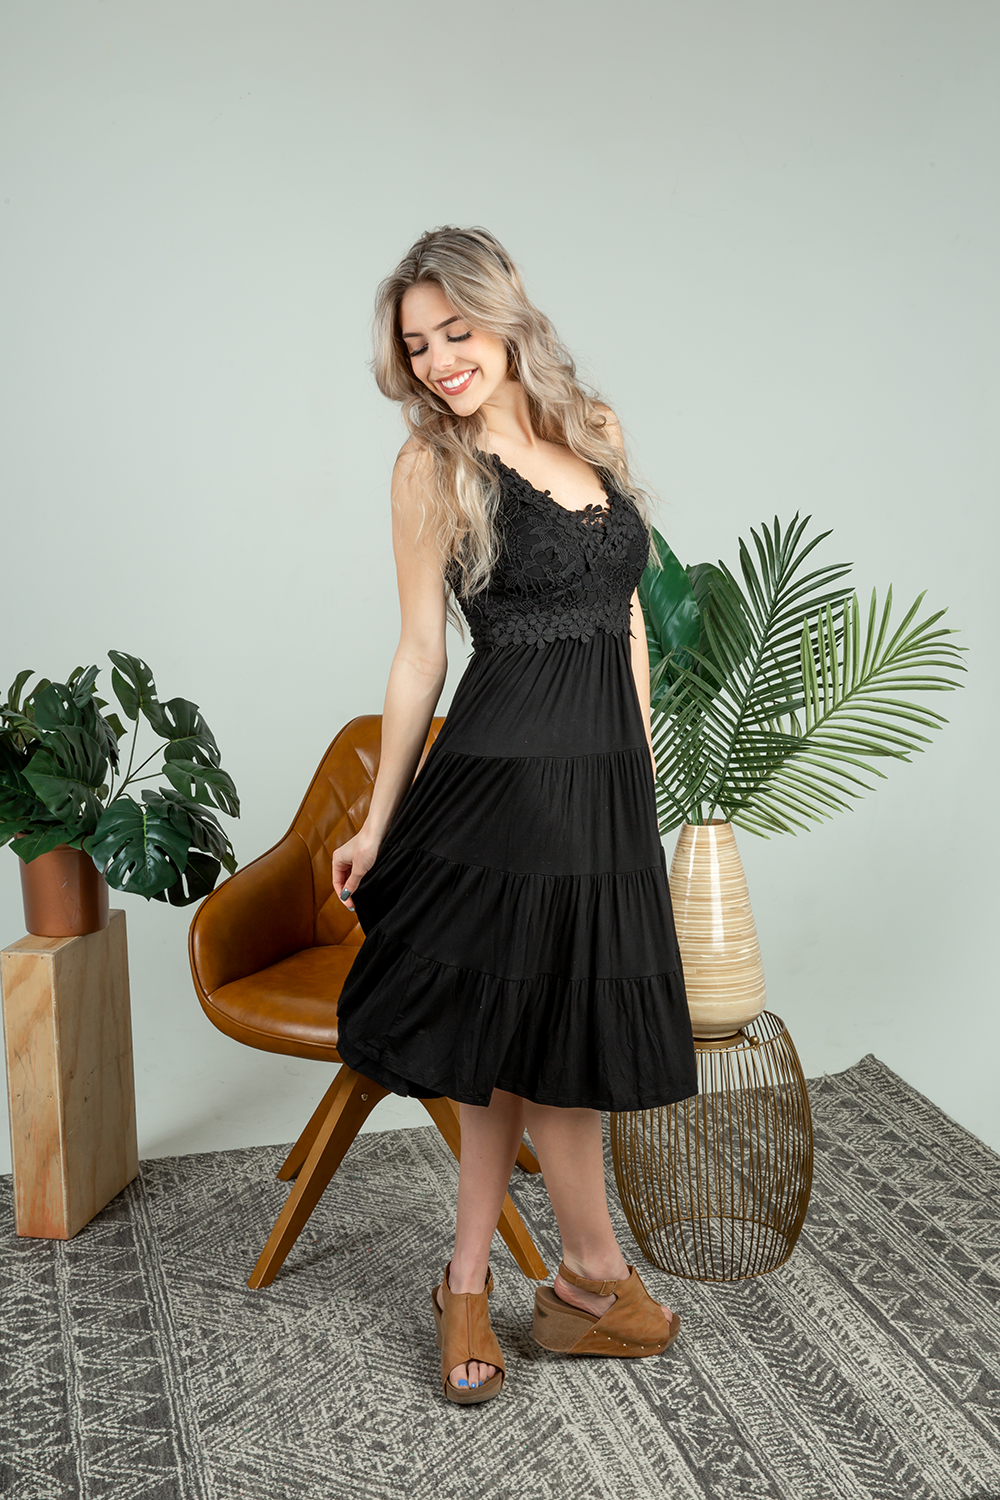 All I Have is You Dress With Floral Lace Detailing in Black